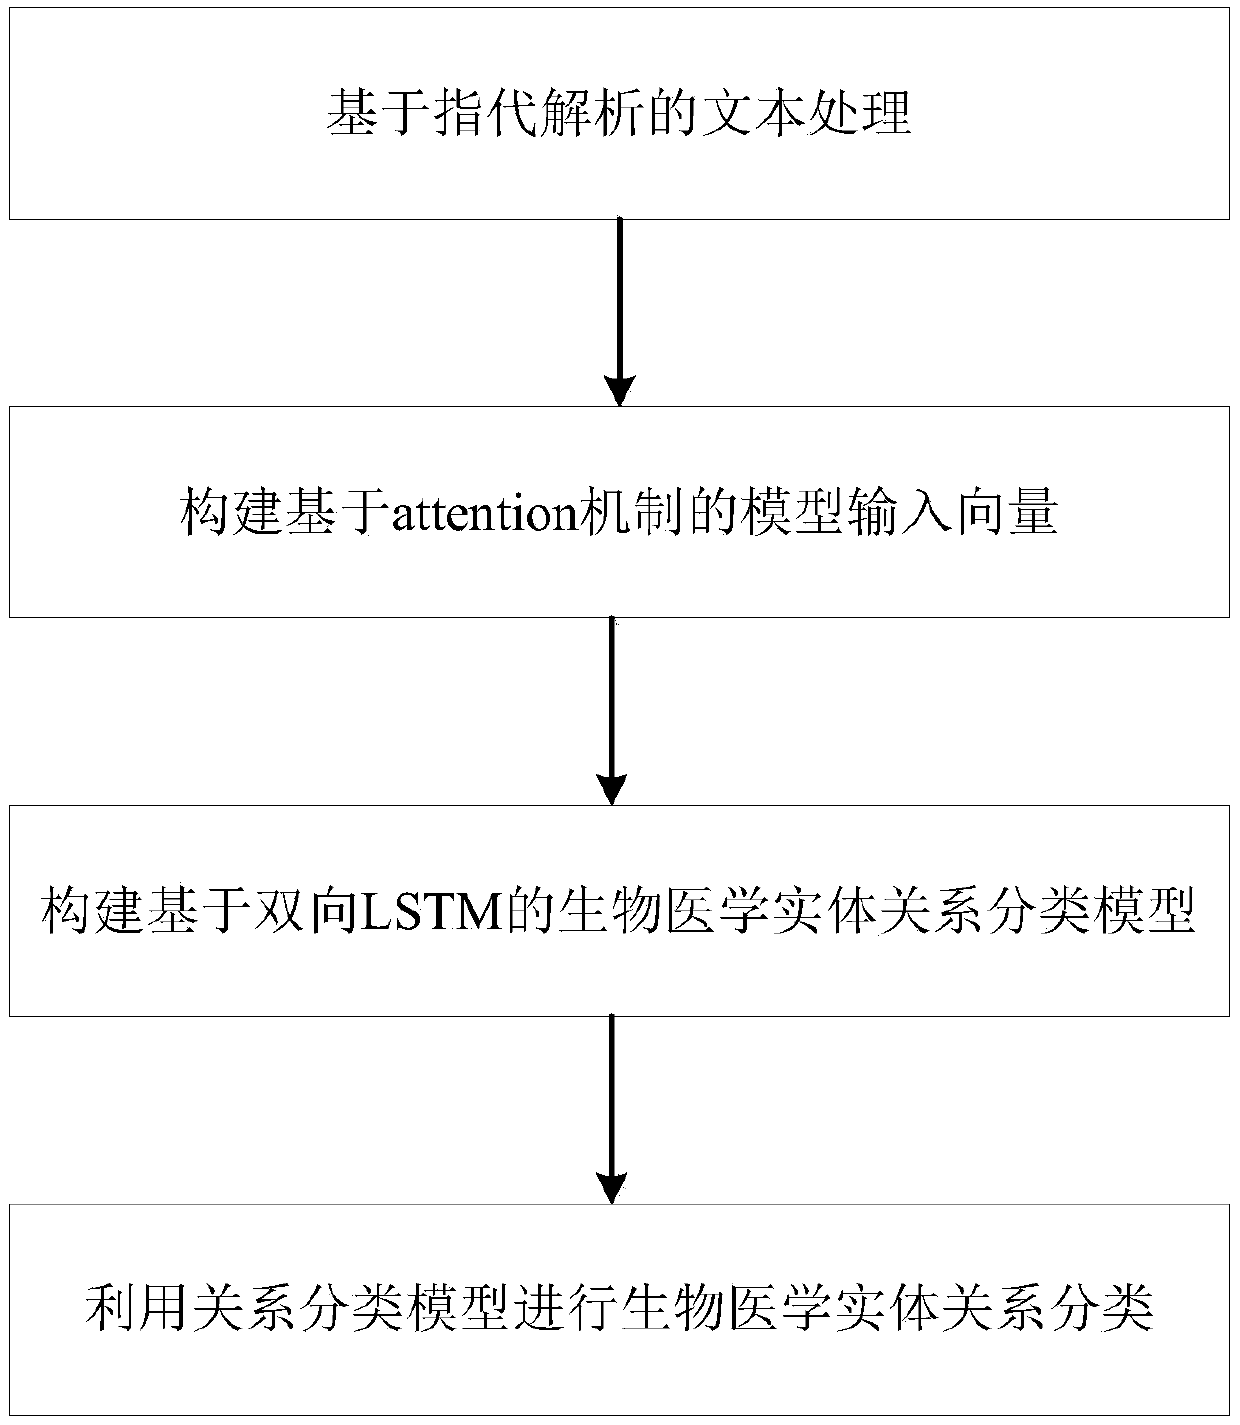 Bio-medical entity relation classification method combining attention mechanism and neural network